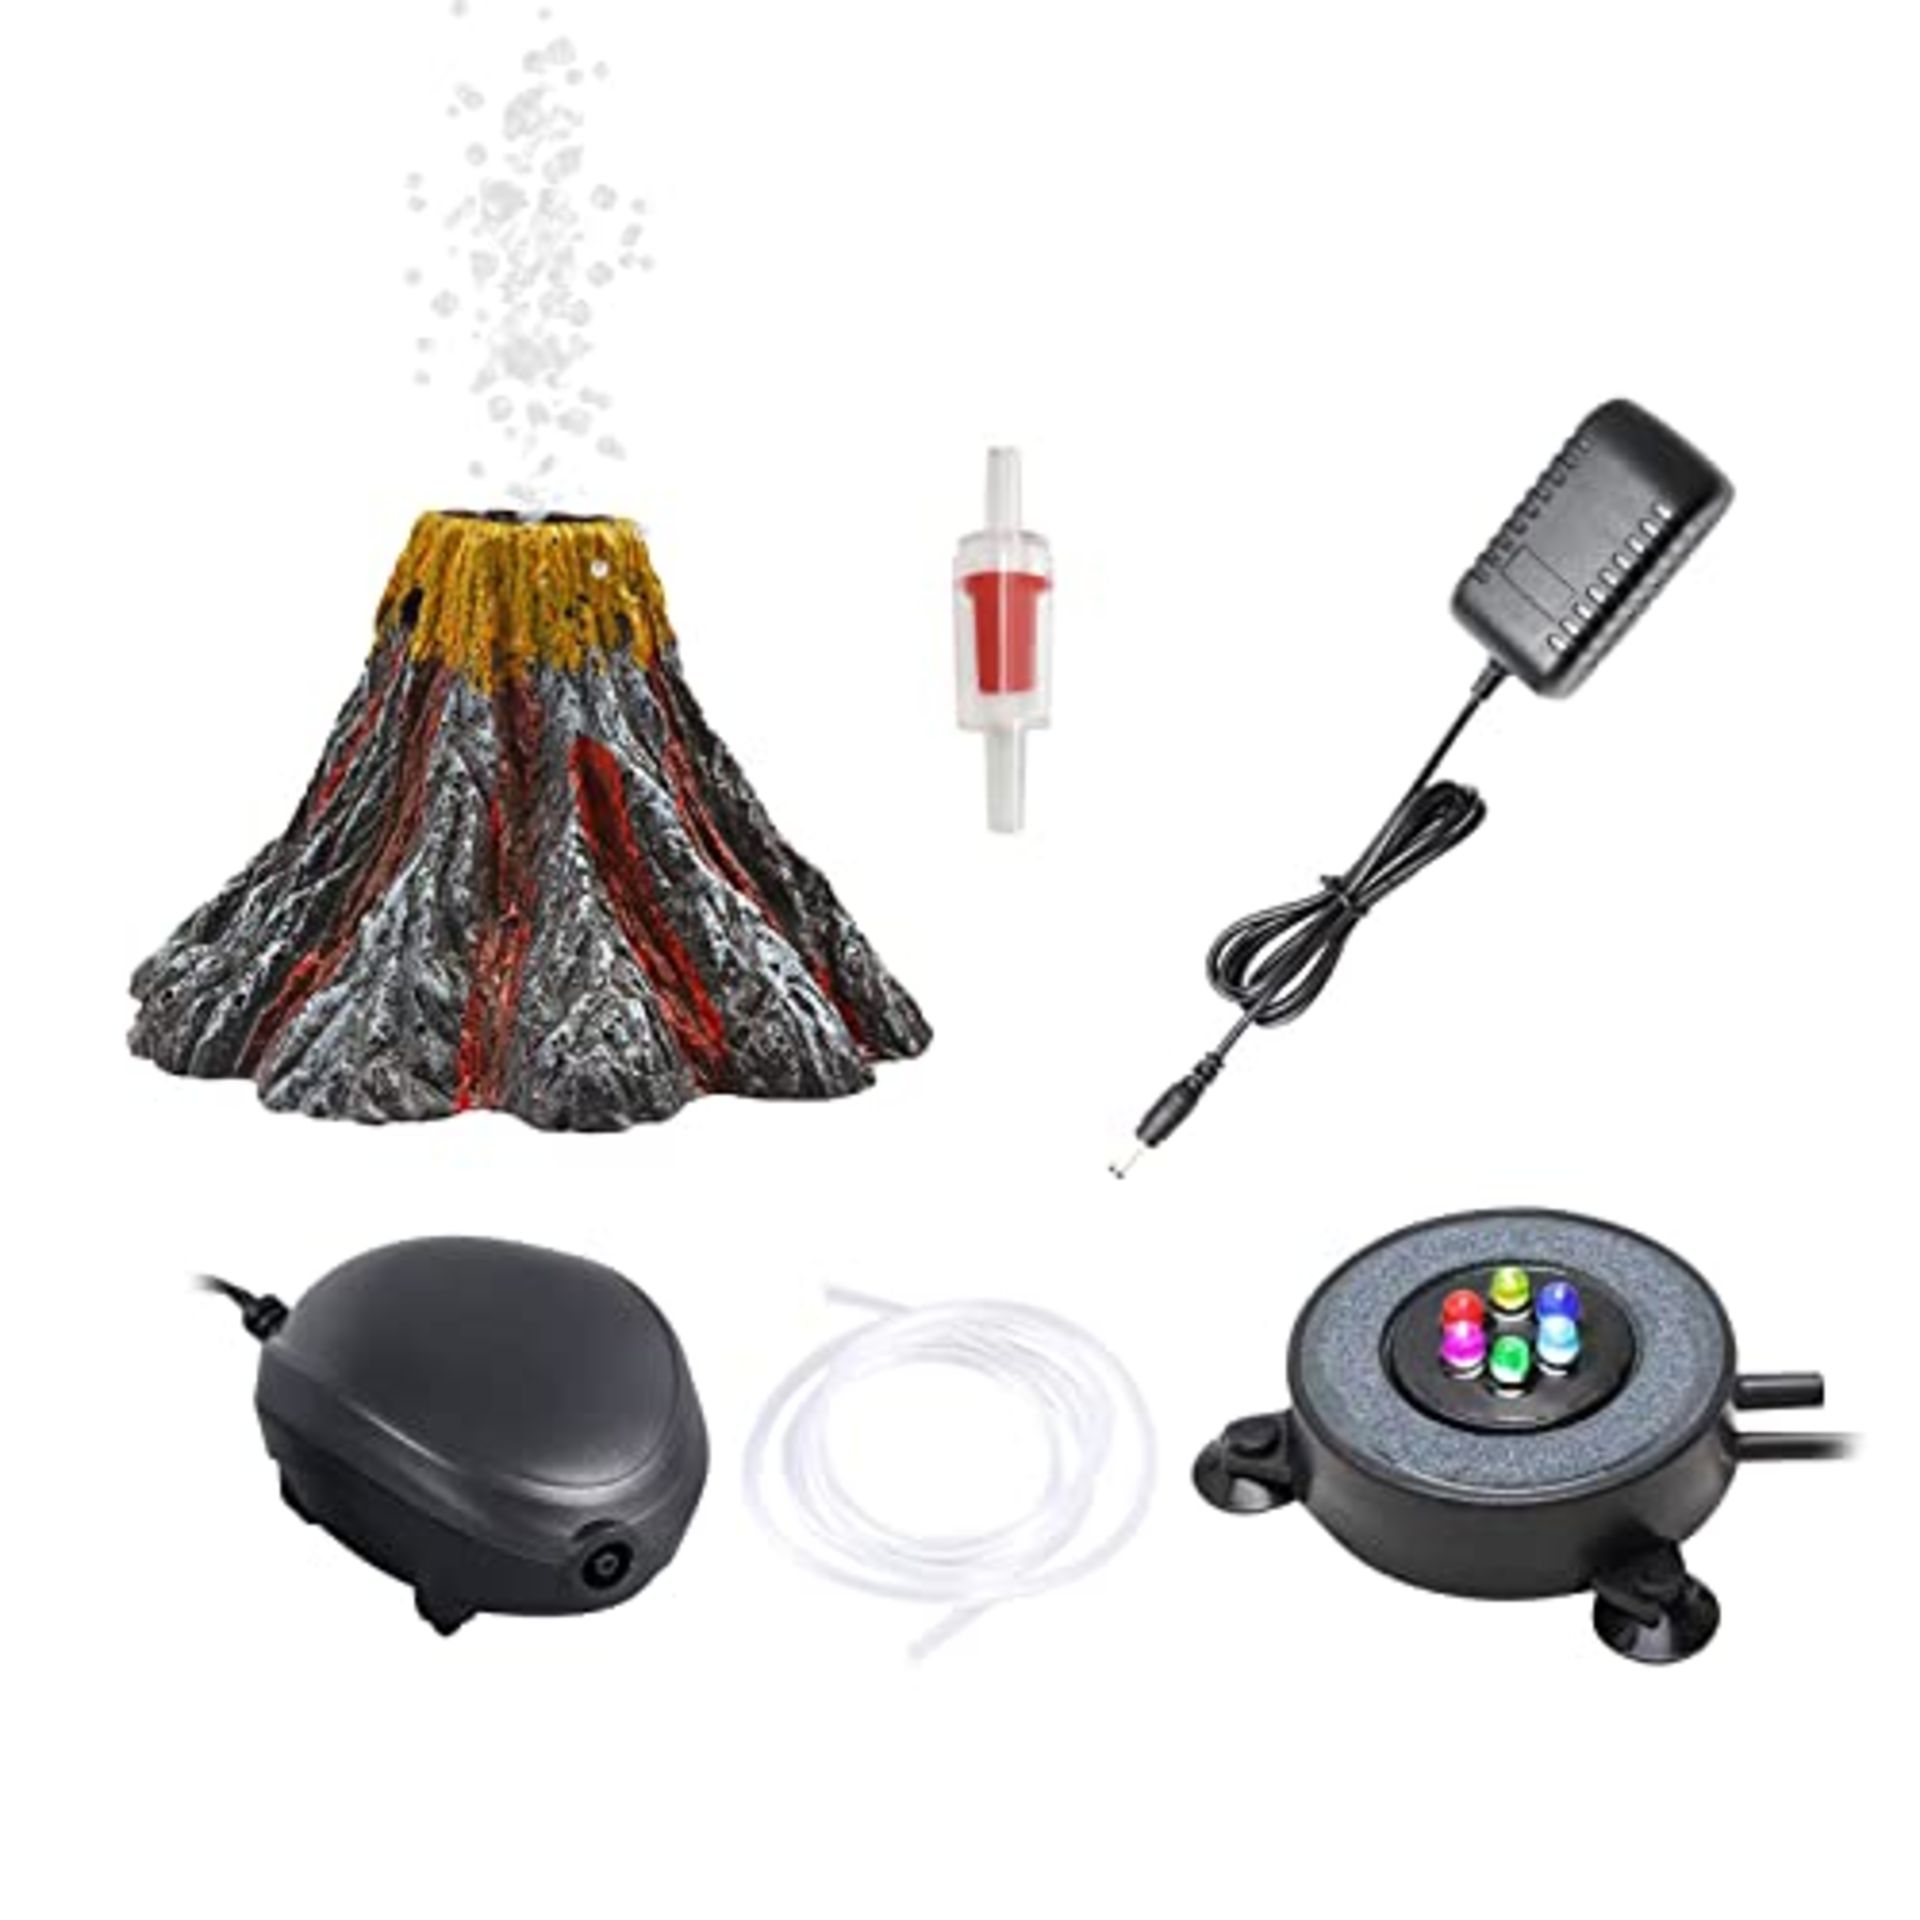 RRP £87.23 Total, Lot Consisting of 3 Items - See Description. - Image 3 of 3